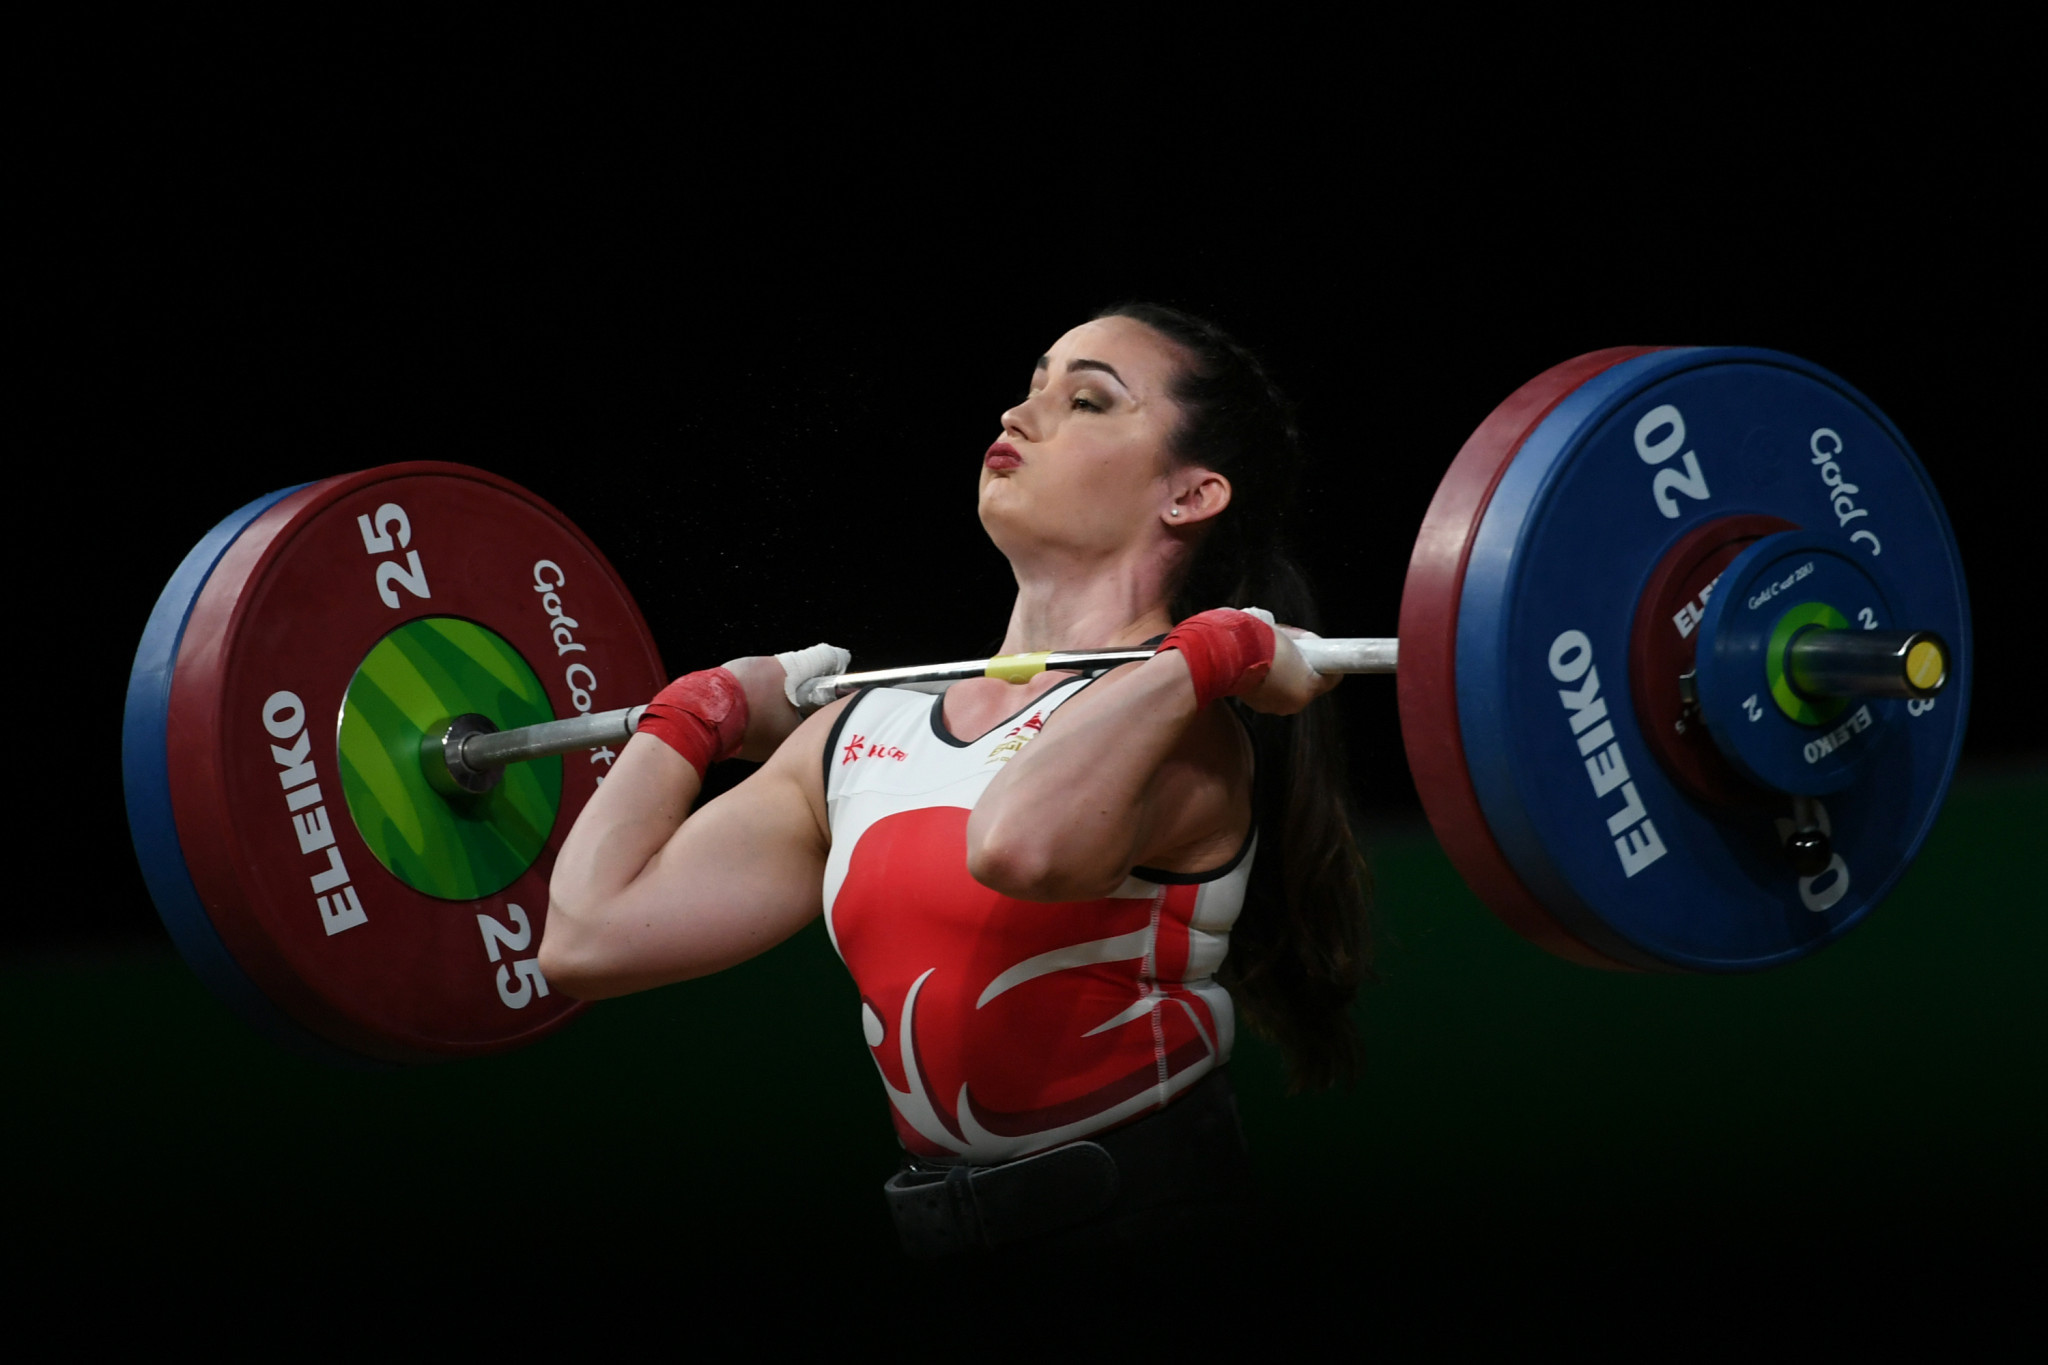 Sarah Davies has resigned as chair of the International Weightlifting Feder...